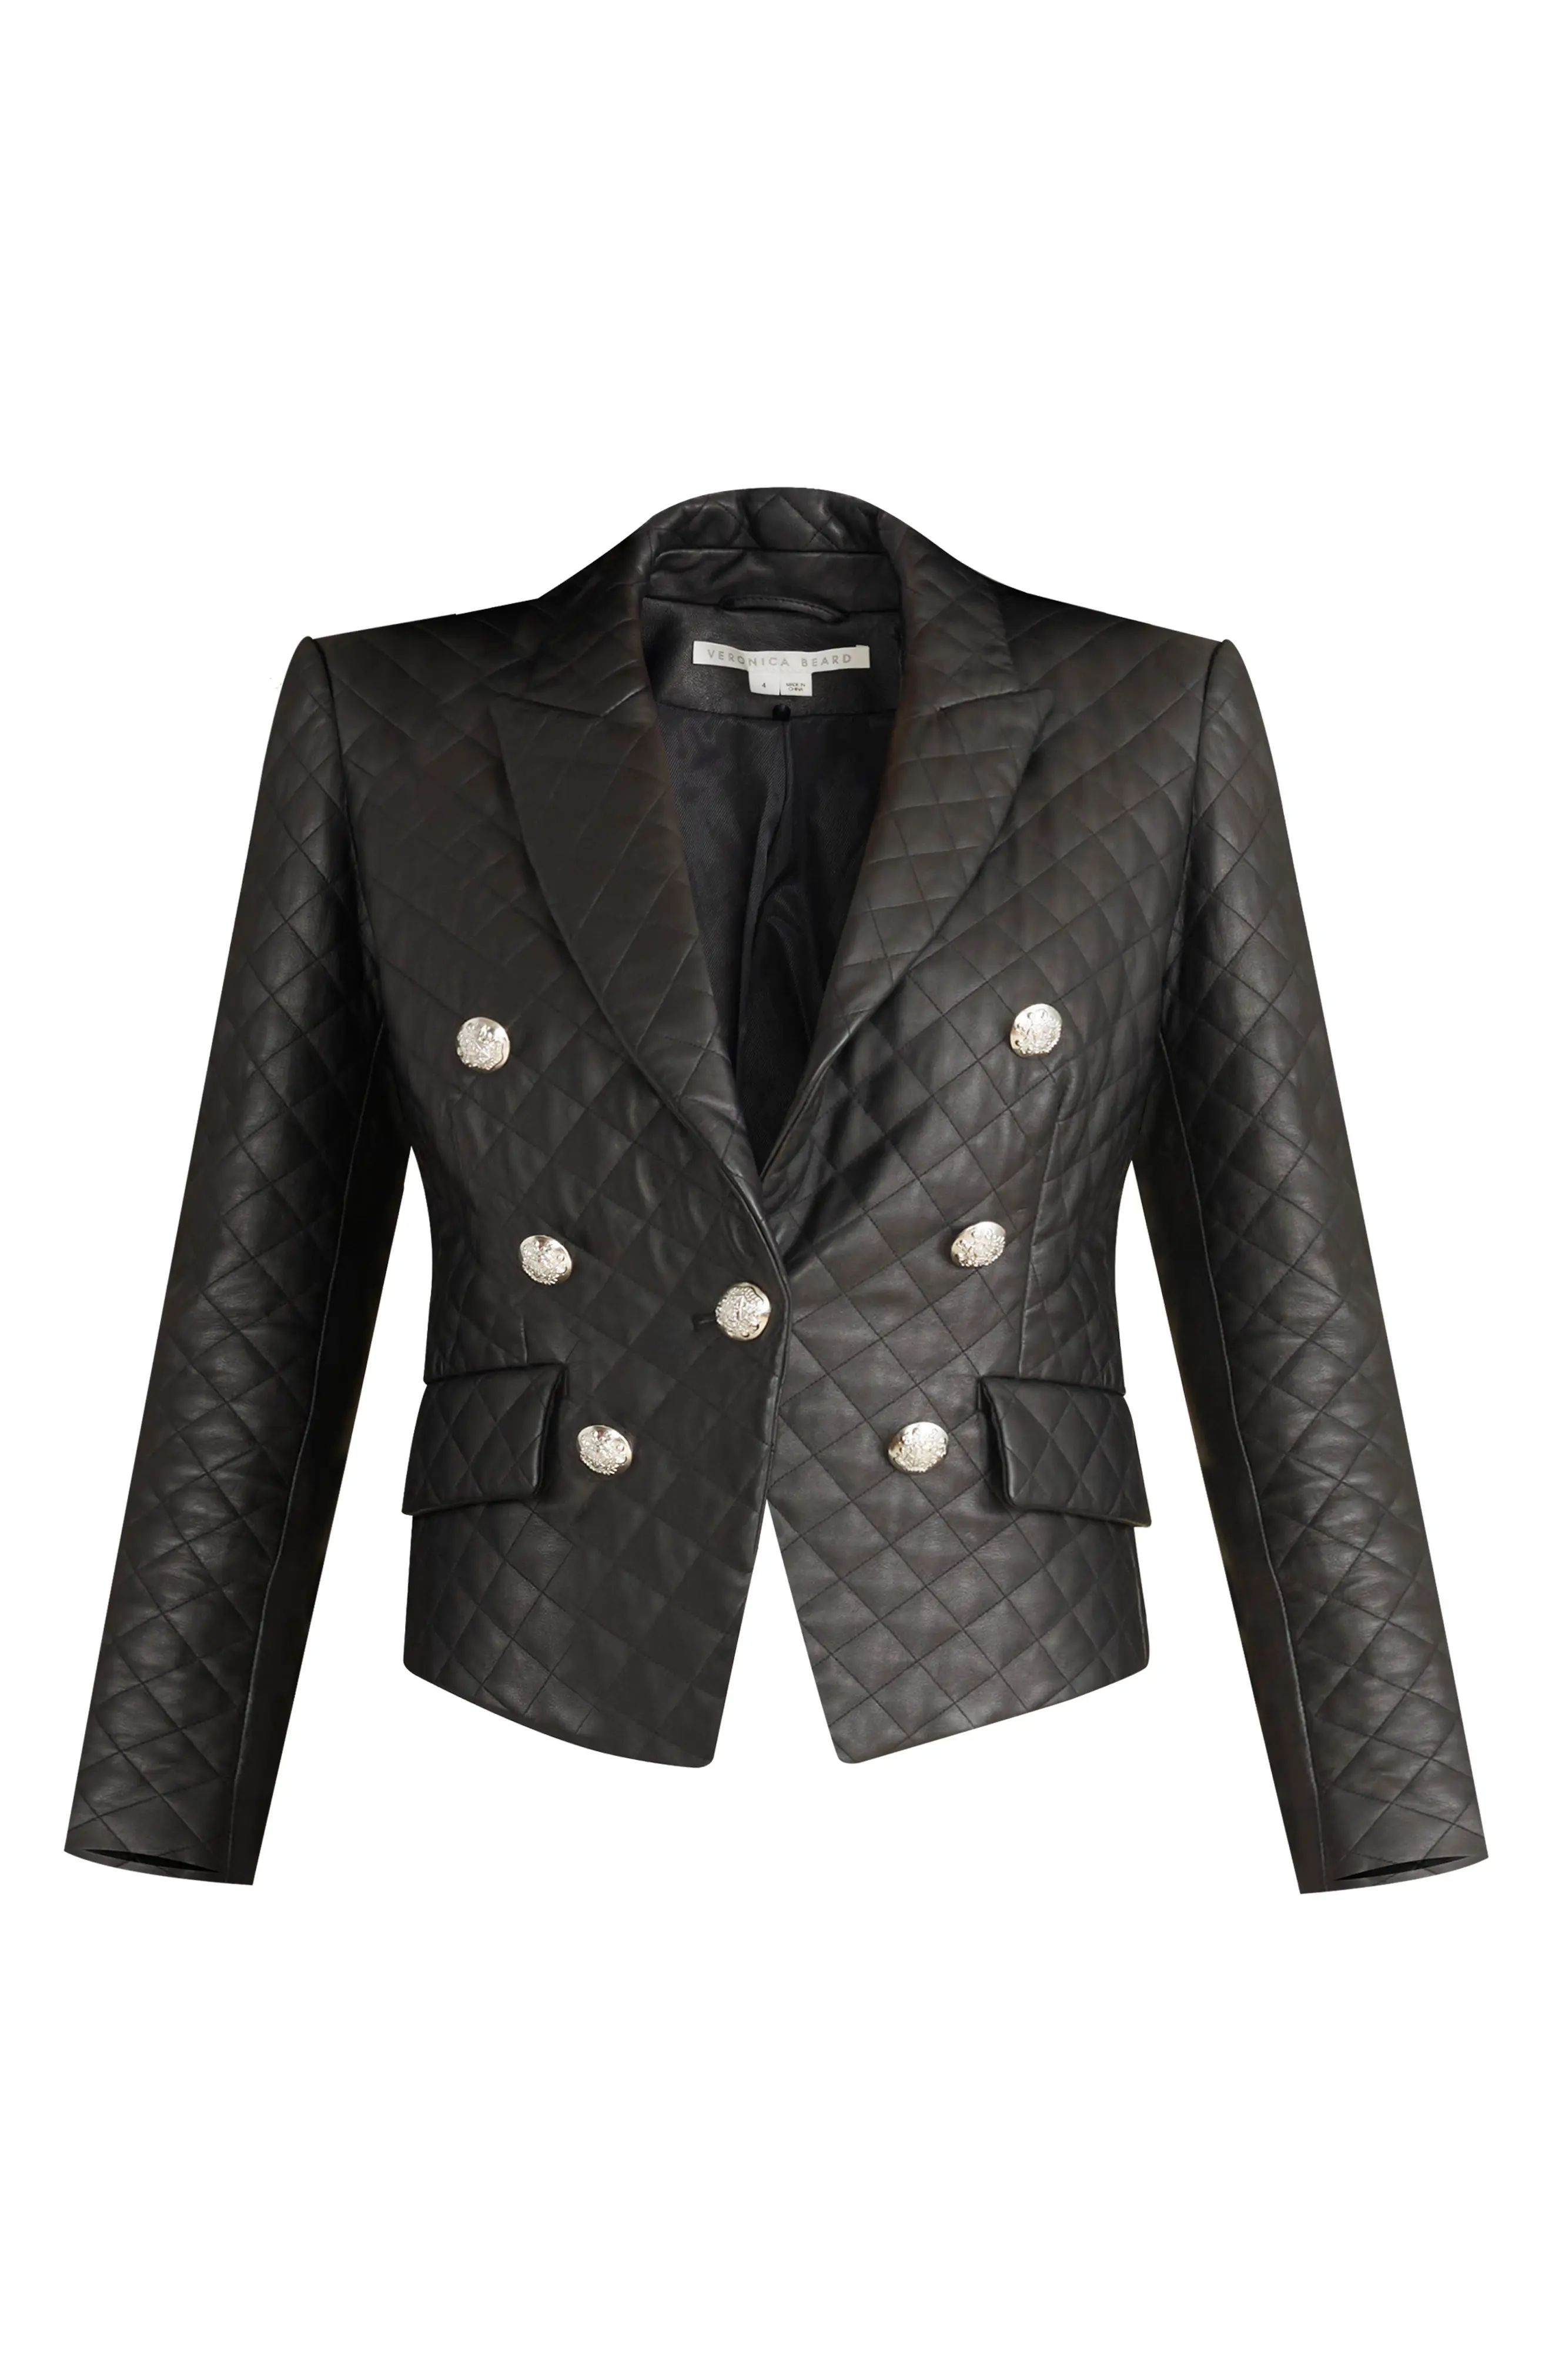 Women's Veronica Beard Cooke Quilted Lambskin Leather Dickey Jacket, Size 2 - Black | Nordstrom